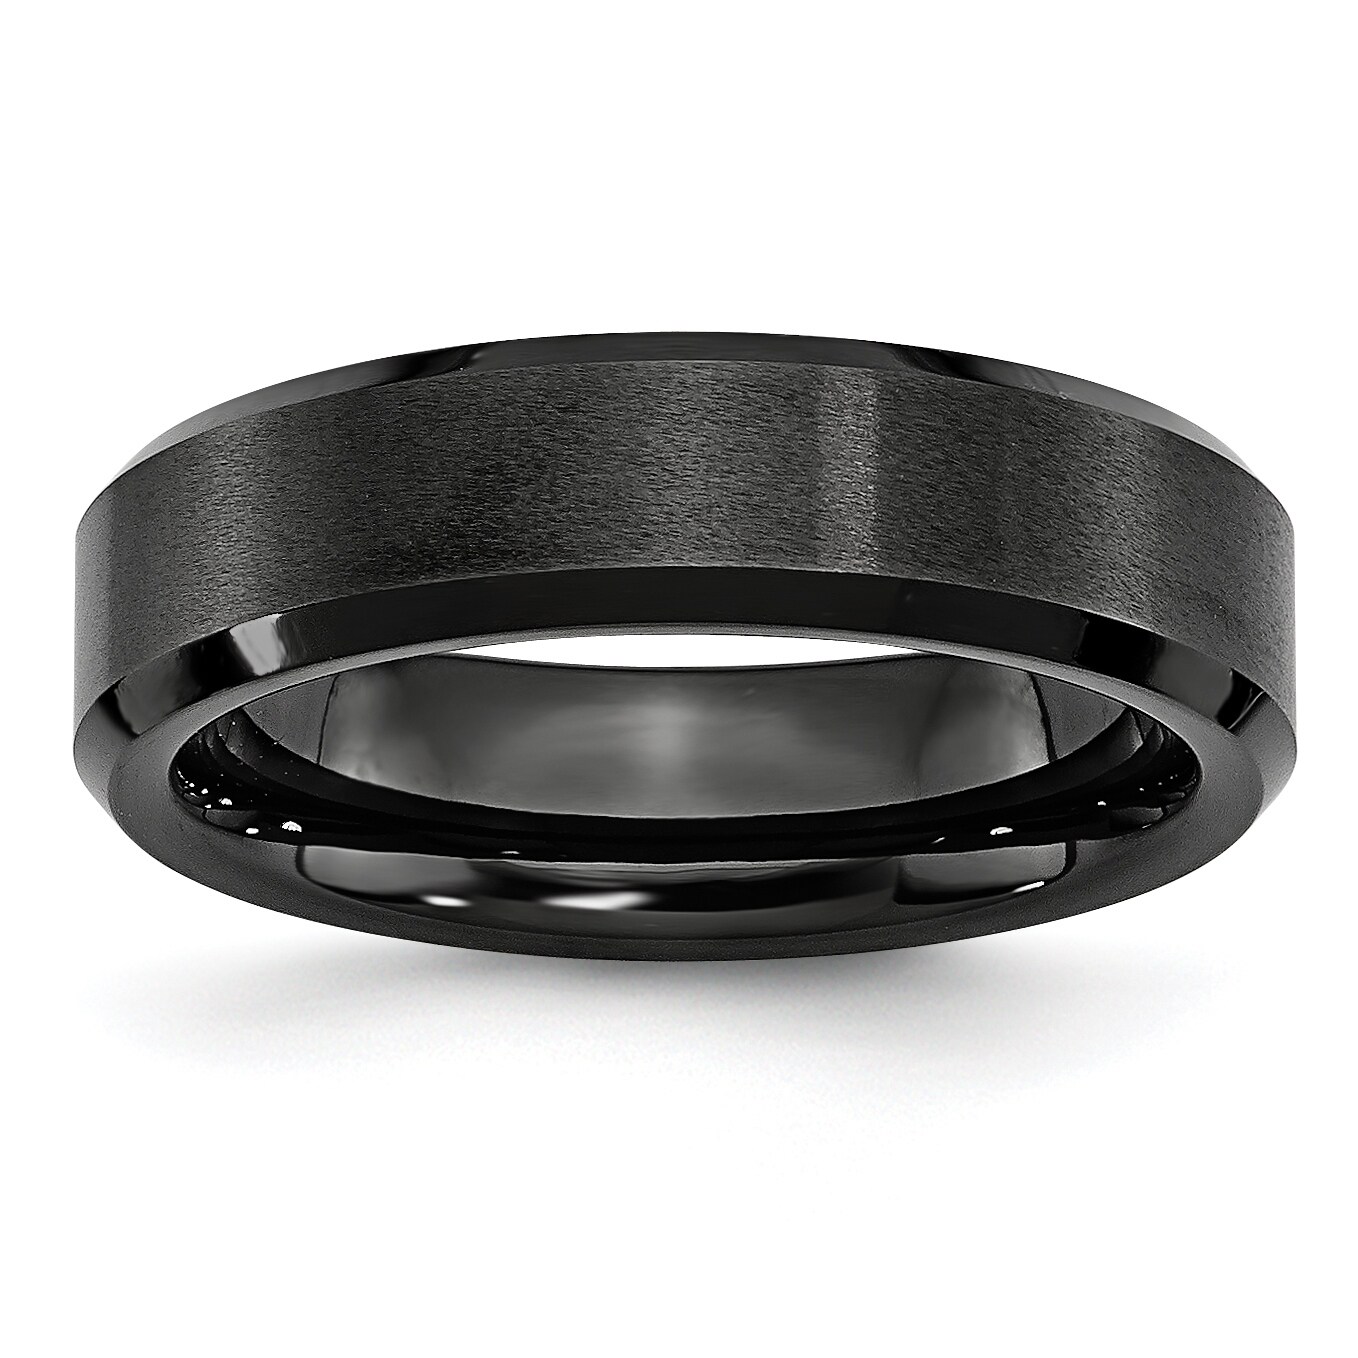 Wedding Bands Classic Bands Flat Bands w/Edge Ceramic Black Faceted and Beveled Edge 6mm Polished Band Size 12 